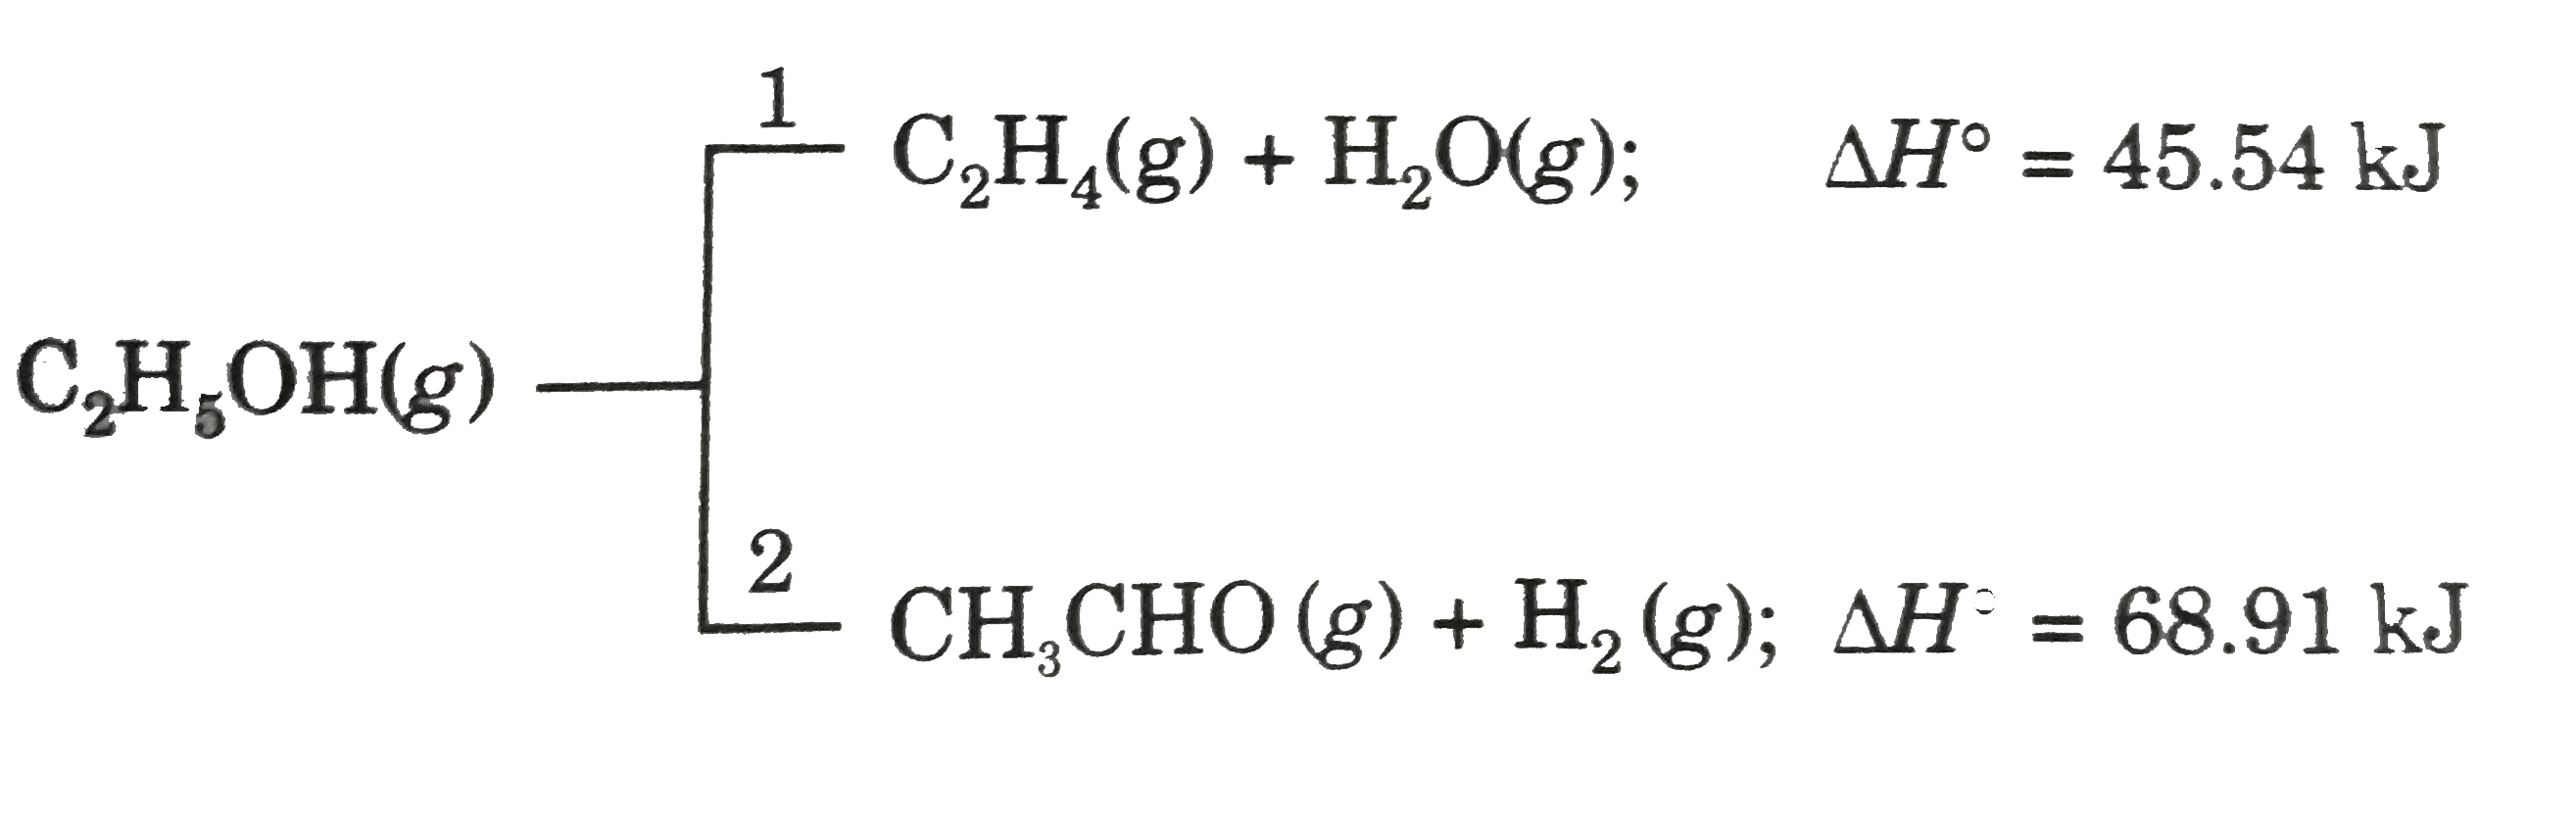 Ethanol can undergo decompostion to form two sets of products.   If the molar ratio of C(4)H(4)